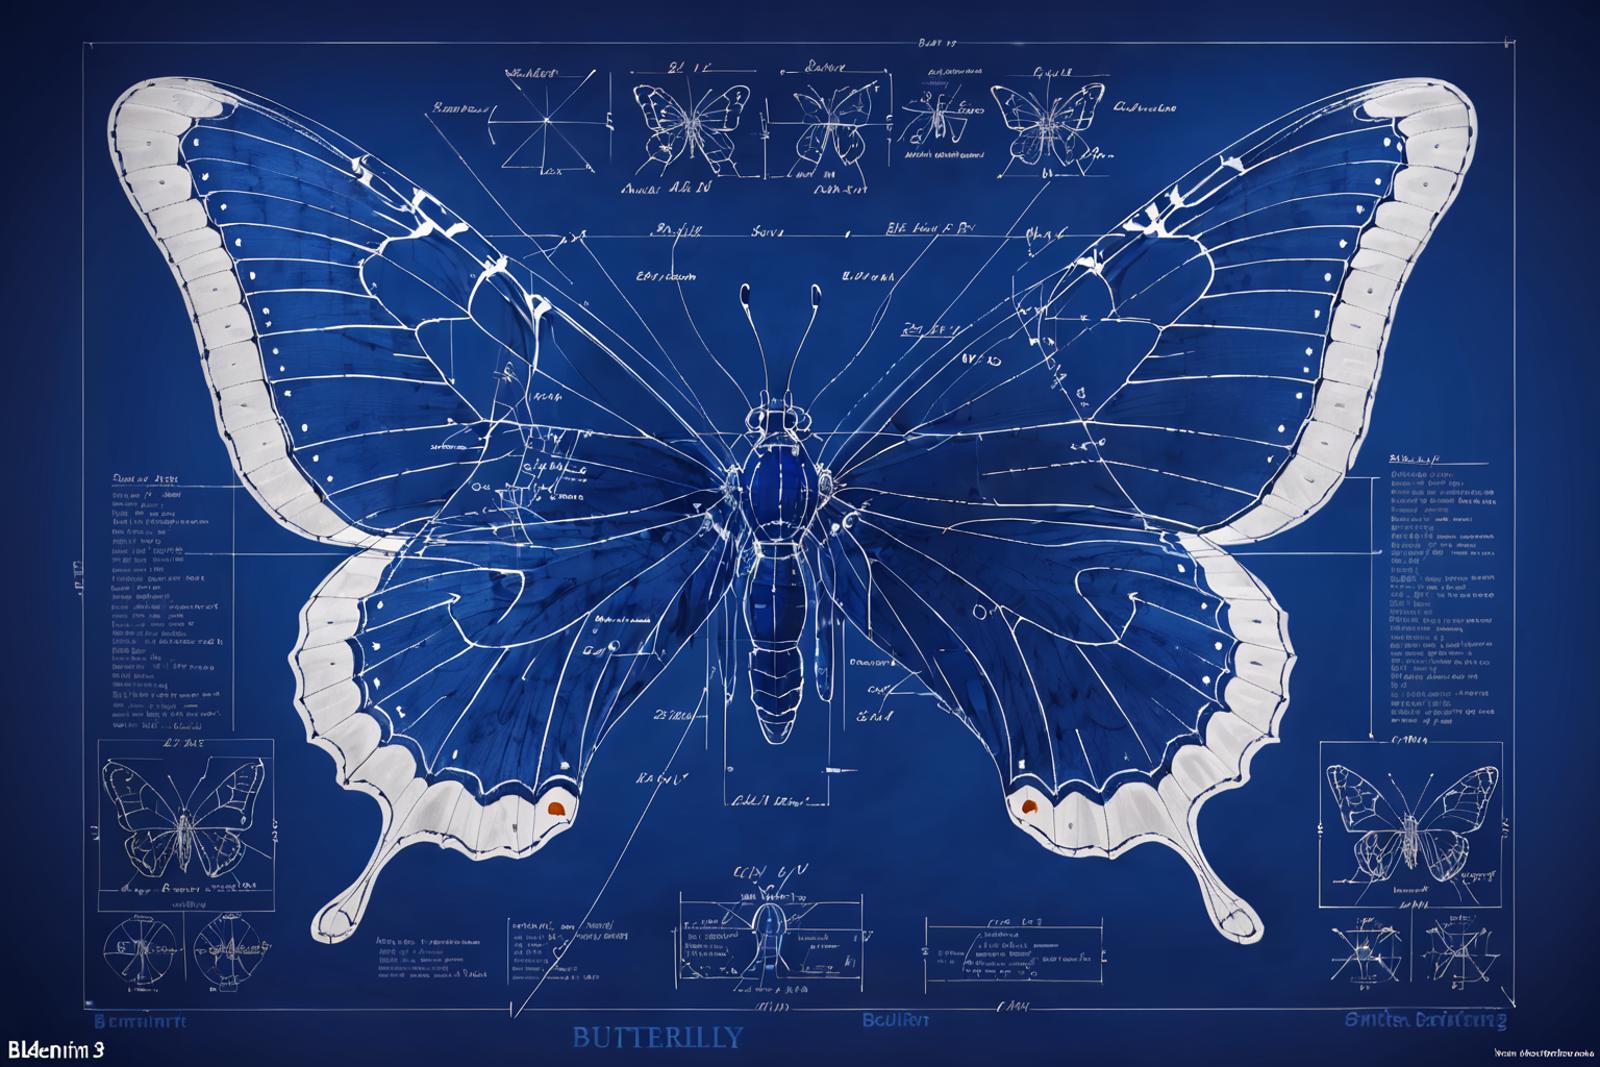 Blueprint of a butterfly showing its wings and anatomy